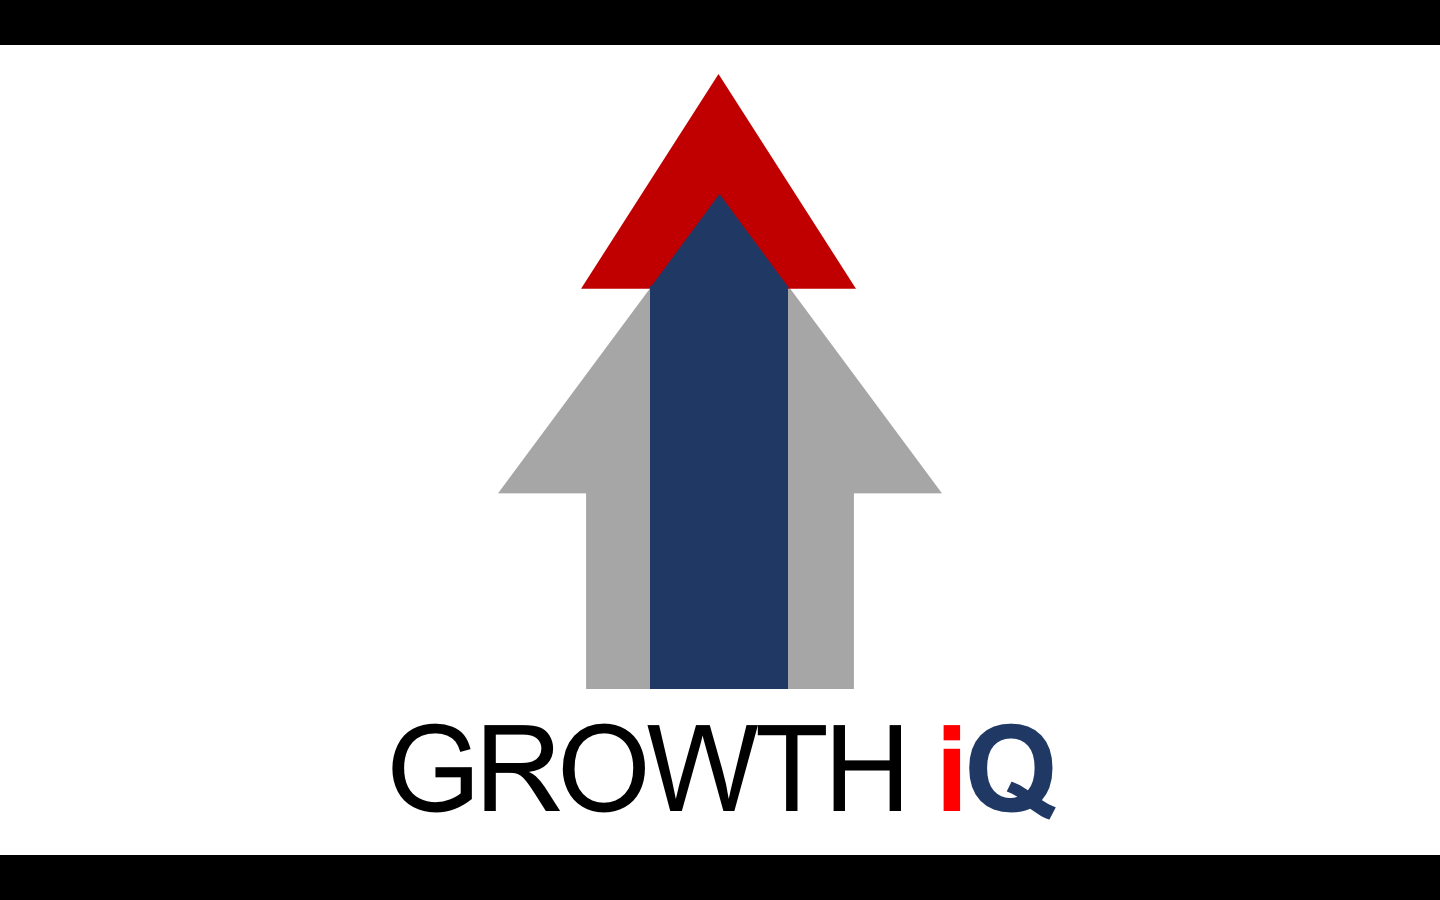 Aiden Logo - Serious, Modern, Business Consultant Logo Design for Growth iQ